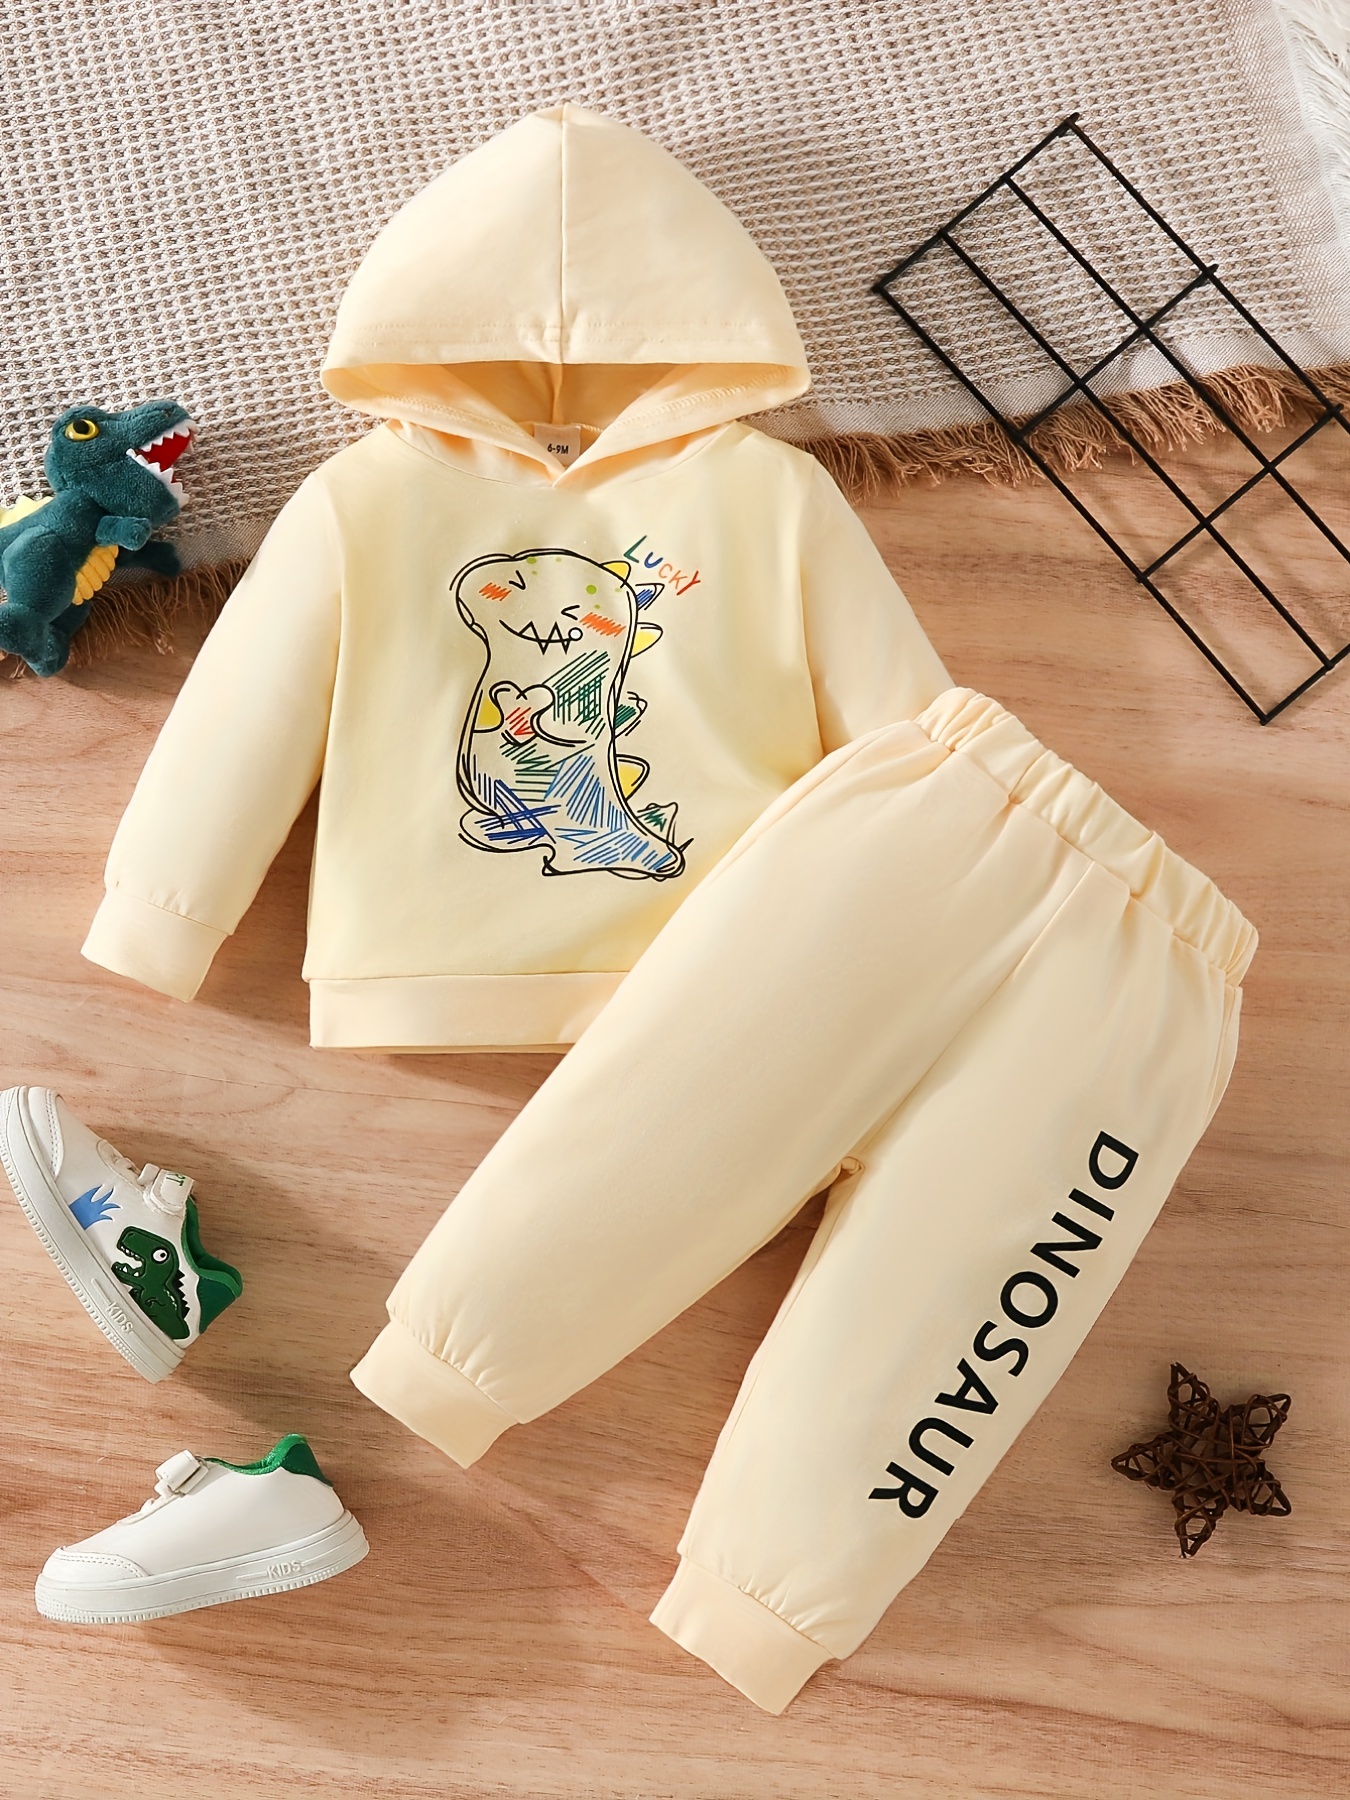 Boys and Girls Toddler Cute Dinosaur Painting Print Sweatshirt Hoodie, Pullover + Pants Set for Autumn and Winter,Temu